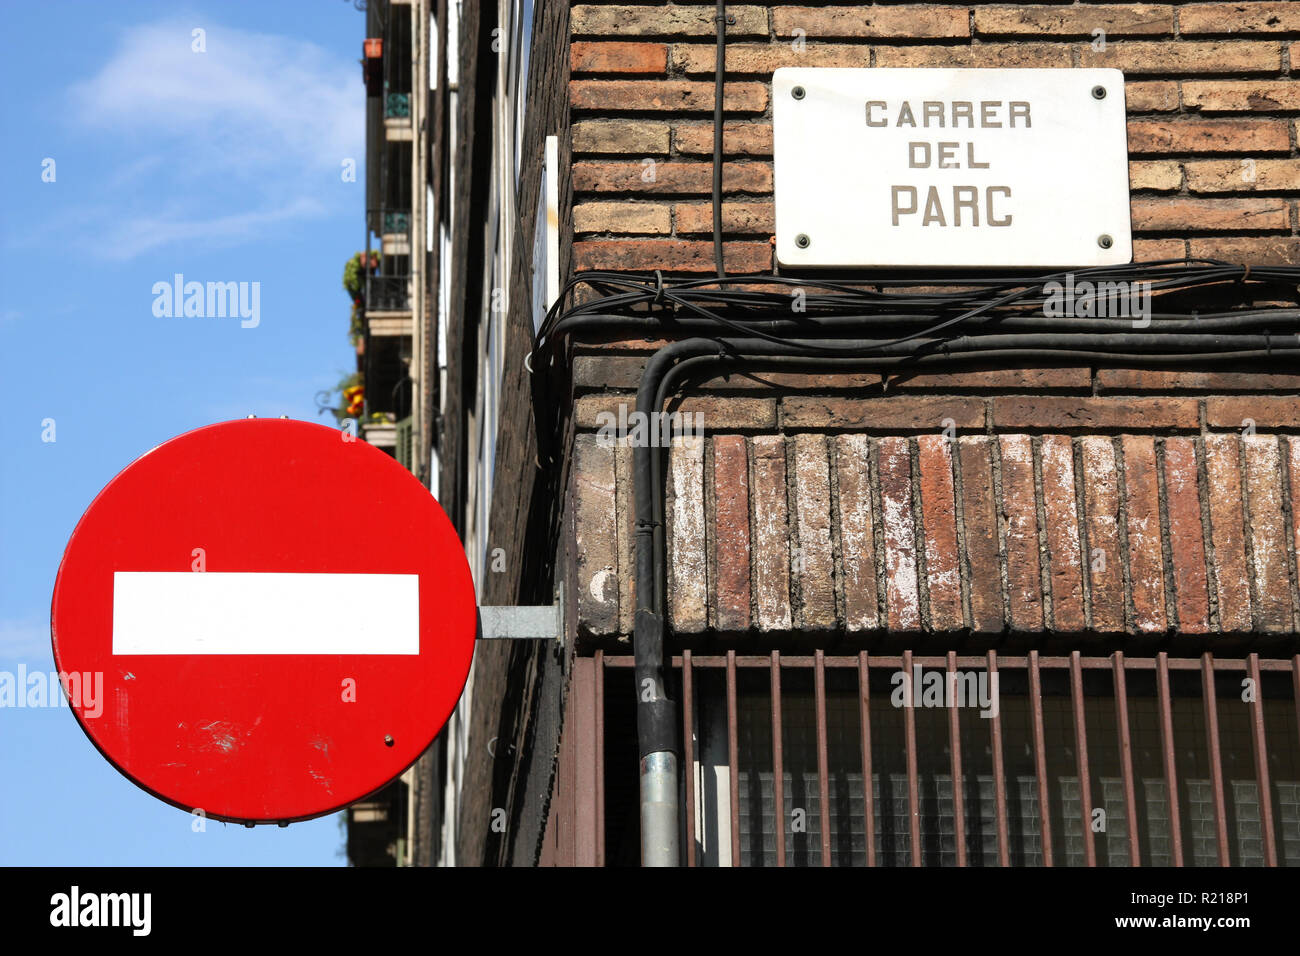 Street name in Barcelona, Spain. Carrer del Parc. No entry sign - city detail. Stock Photo